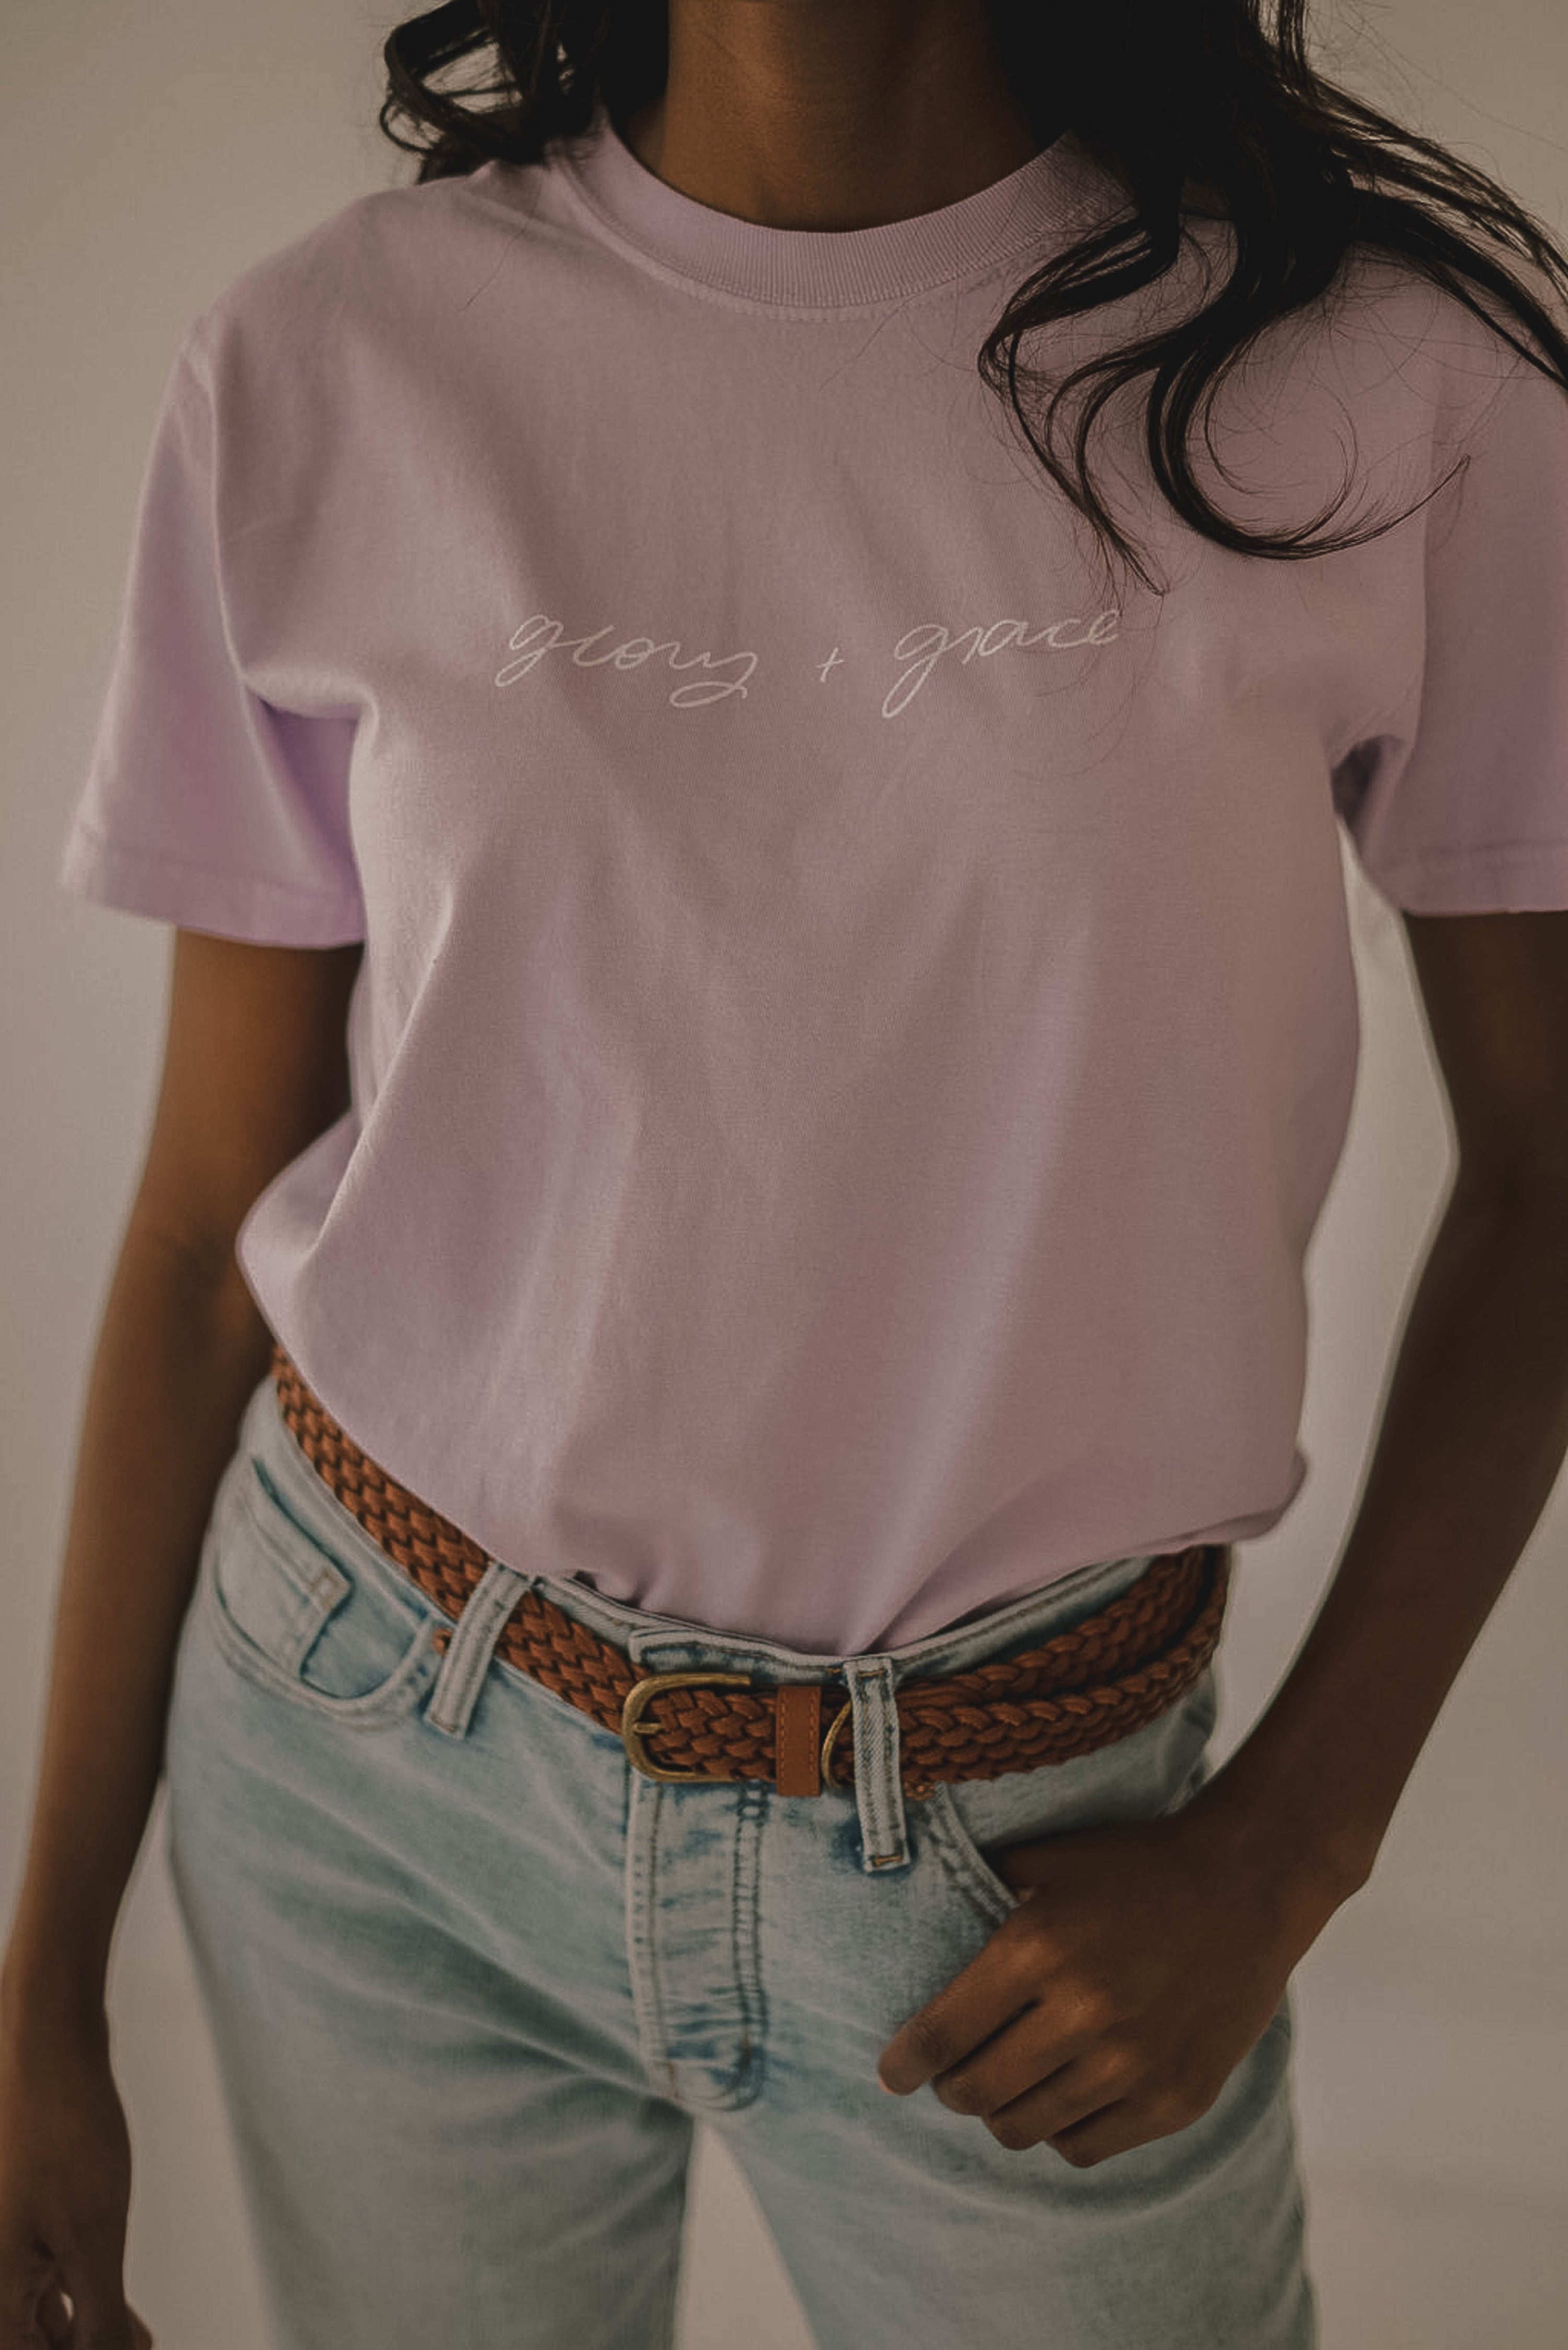 Glory + Grace Tee- Orchid